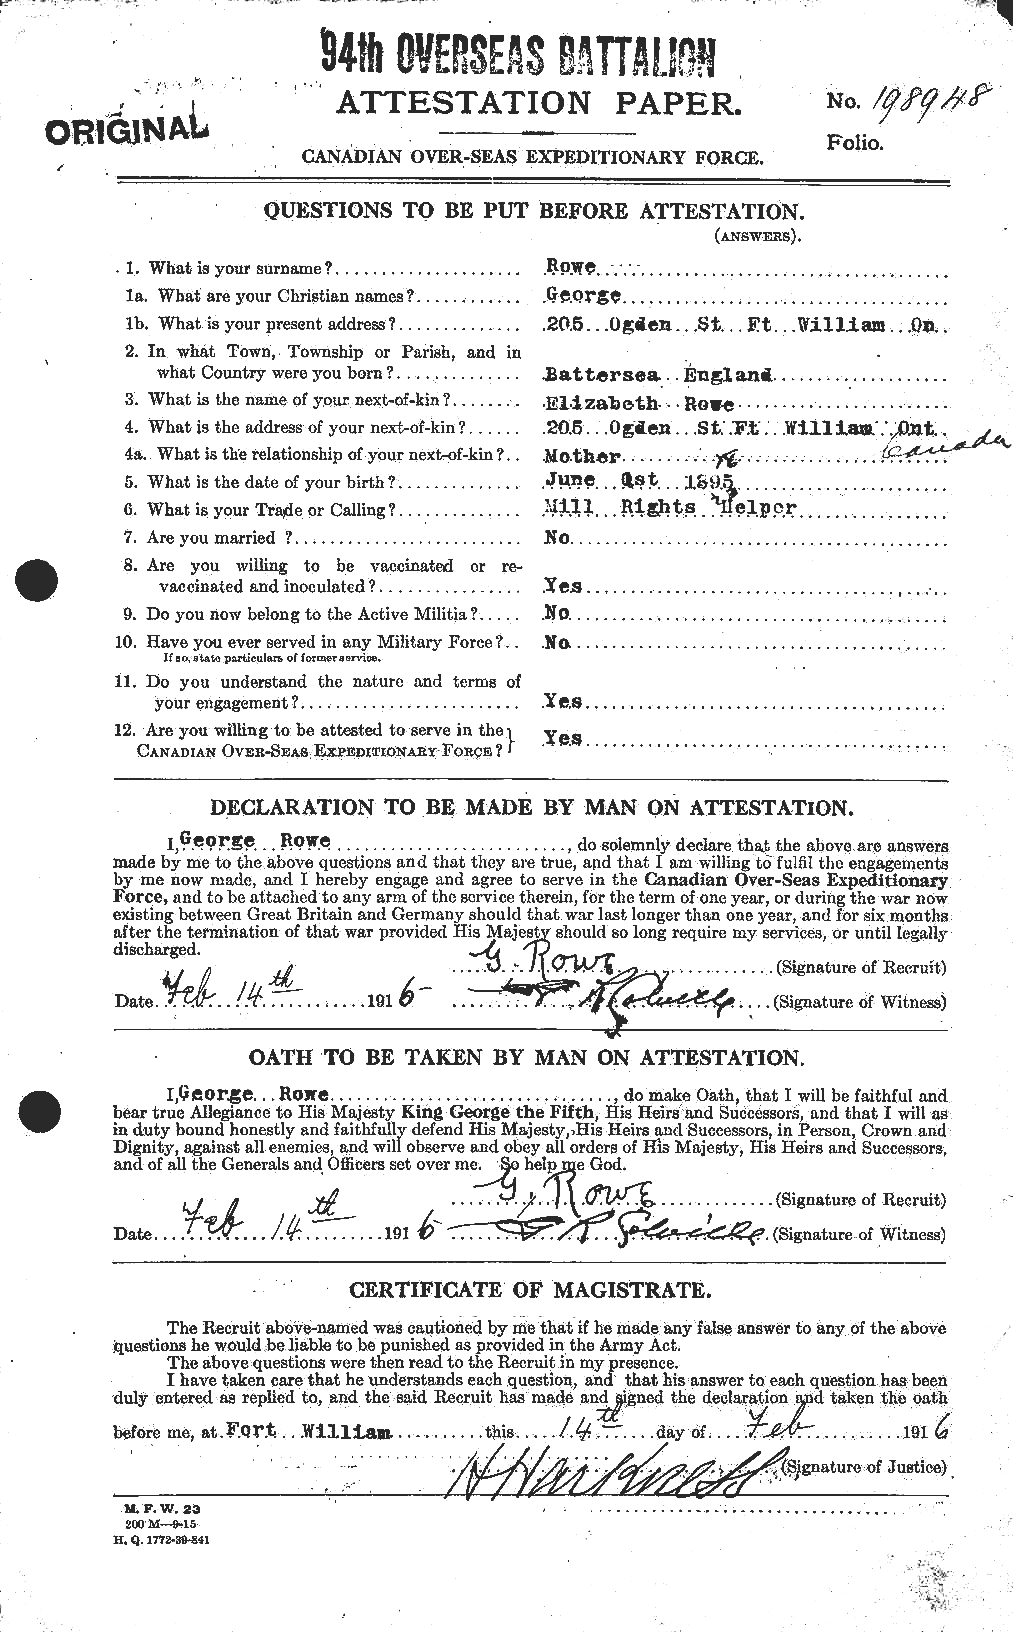 Personnel Records of the First World War - CEF 615871a